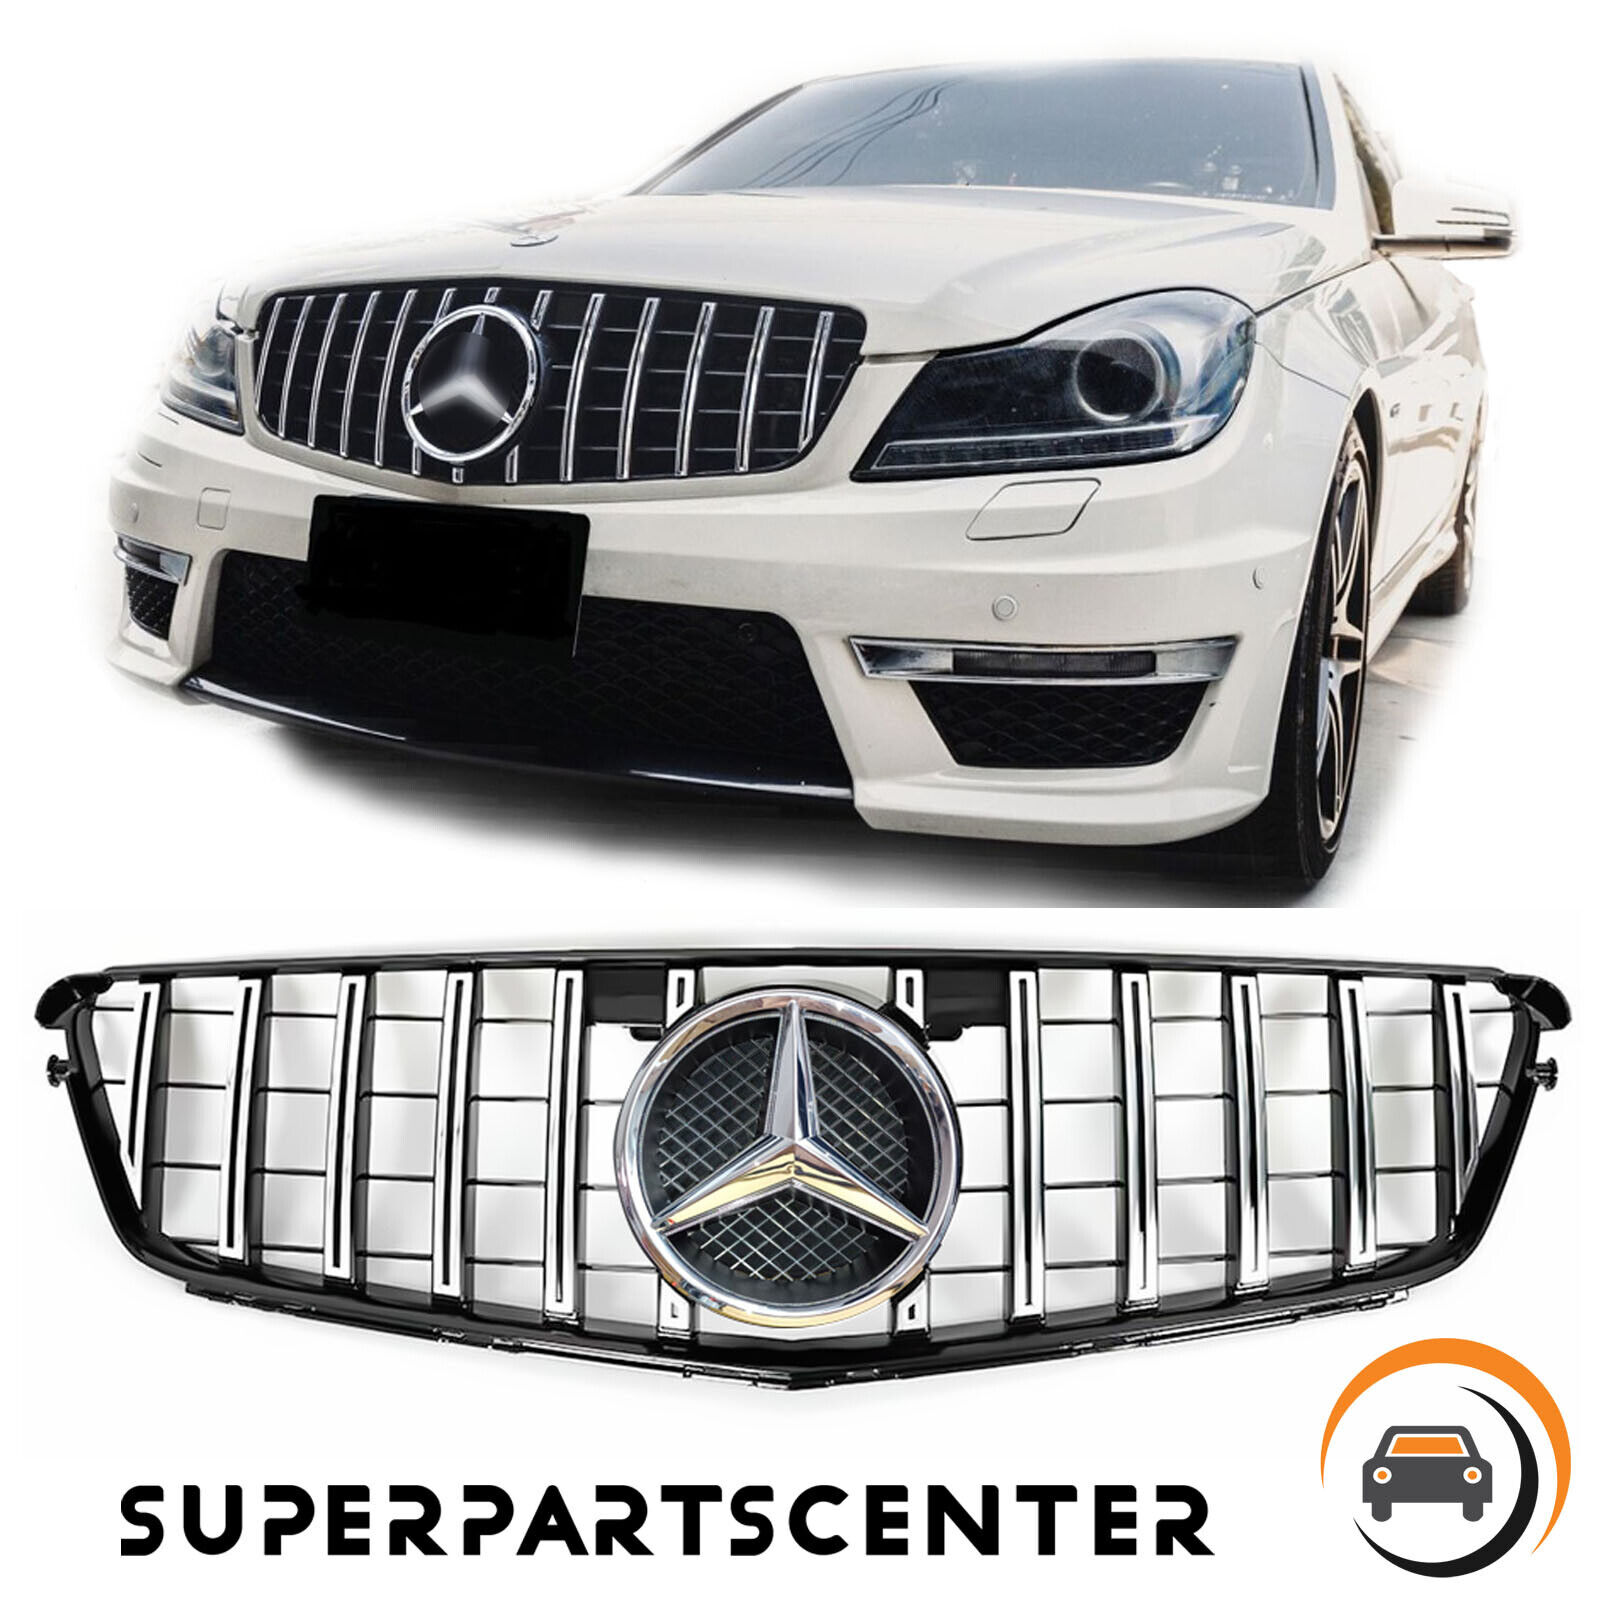 Chrome Front Grille Grill w/LED Star For Mercedes Benz W204 C250 C300 C350 08-13